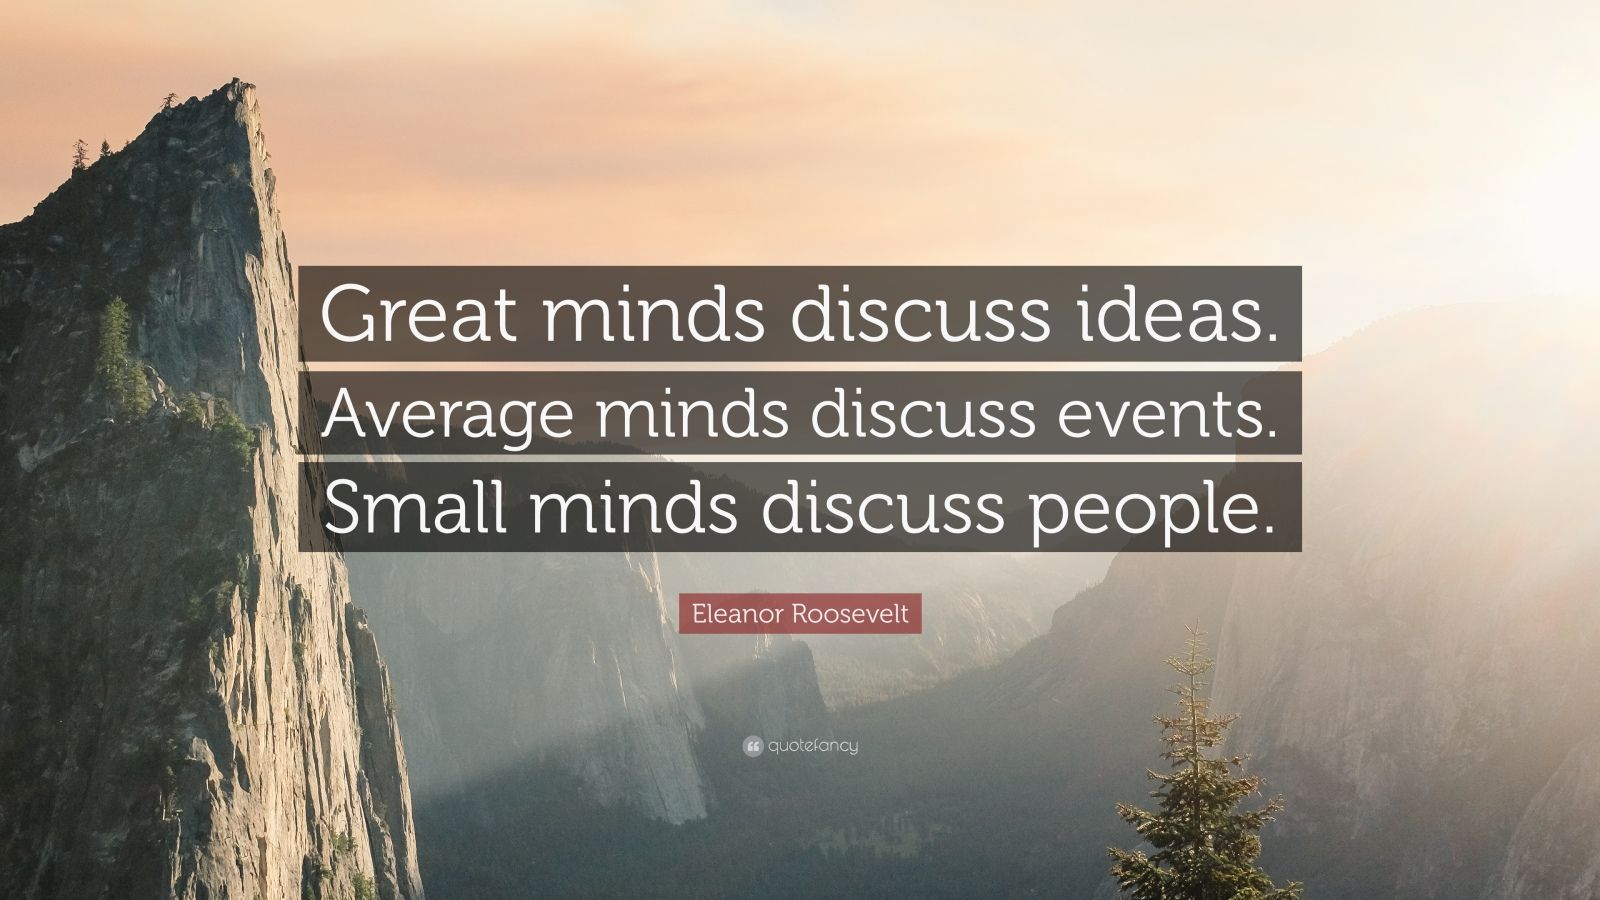 Eleanor Roosevelt Quote: “Great minds discuss ideas. Average minds